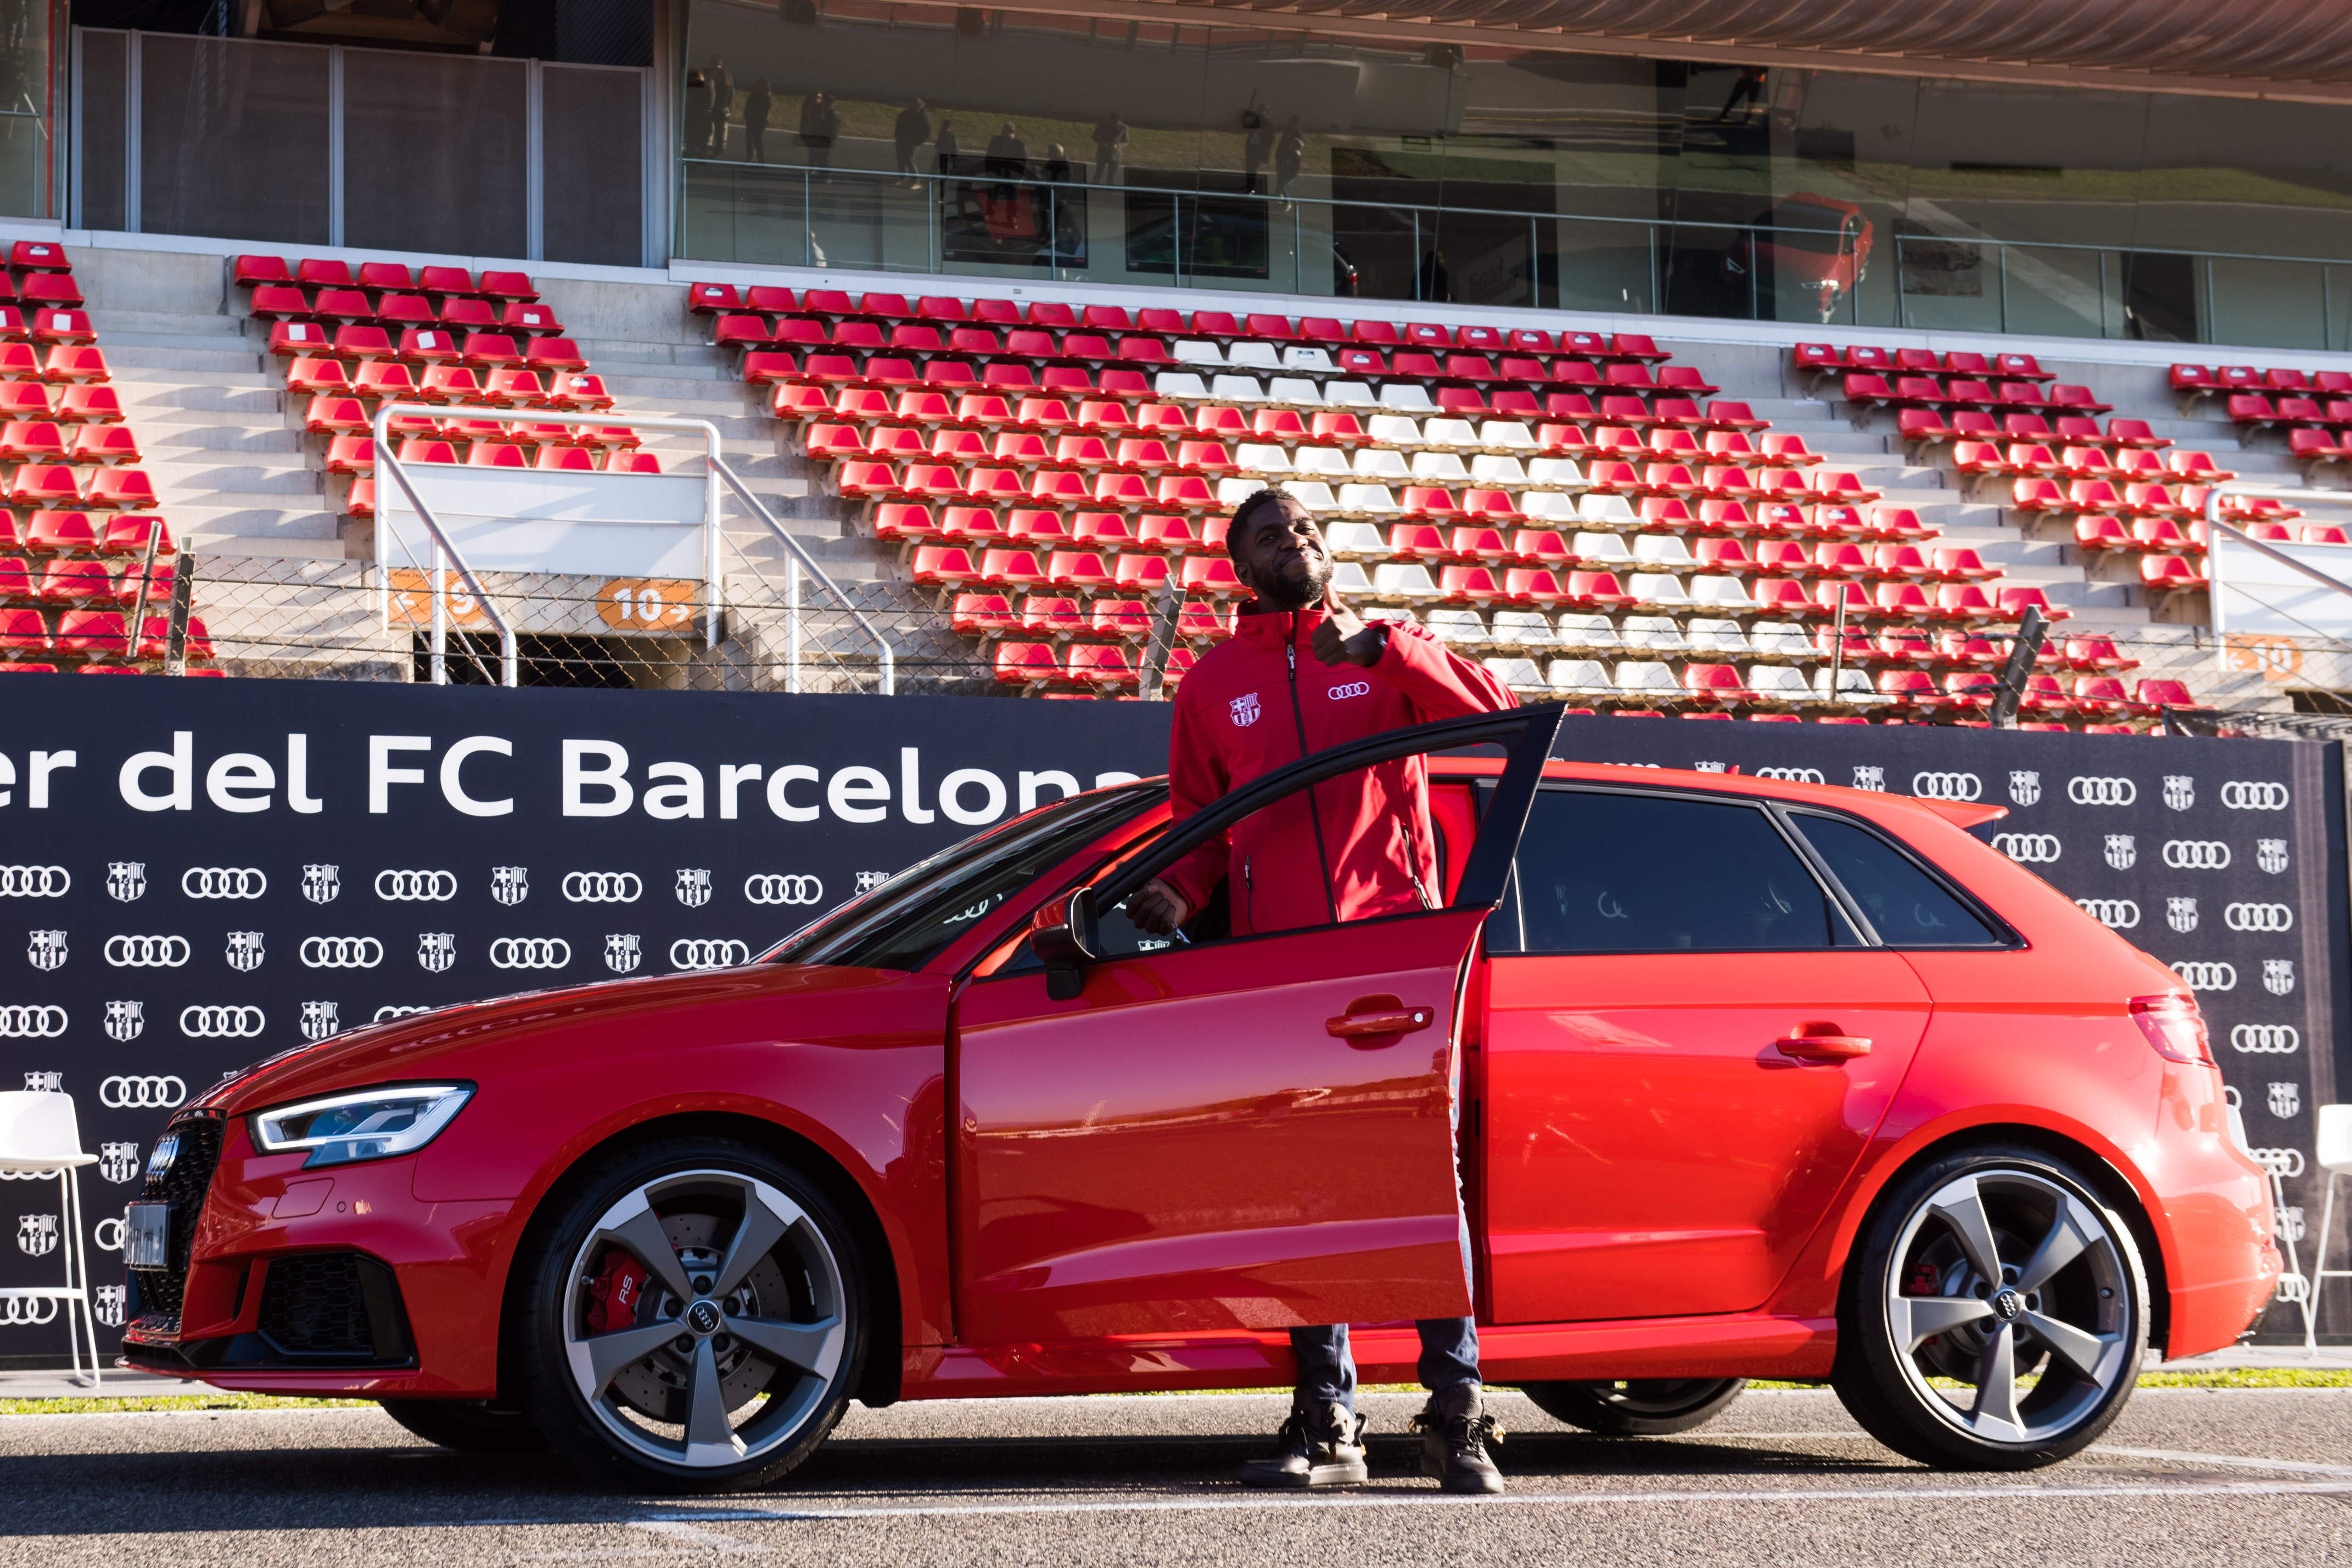 MONTMELO, SPAIN - NOVEMBER 30: Samuel Umtiti of FC Barcelona is presented with his new Audi car during the Audi Car handover to the players of FC Barcelona on November 30, 2017 at Circuit de Barcelona-Catalunya in Montmelo, near Barcelona, Spain. (Photo by Alex Caparros/Getty Images for AUDI)